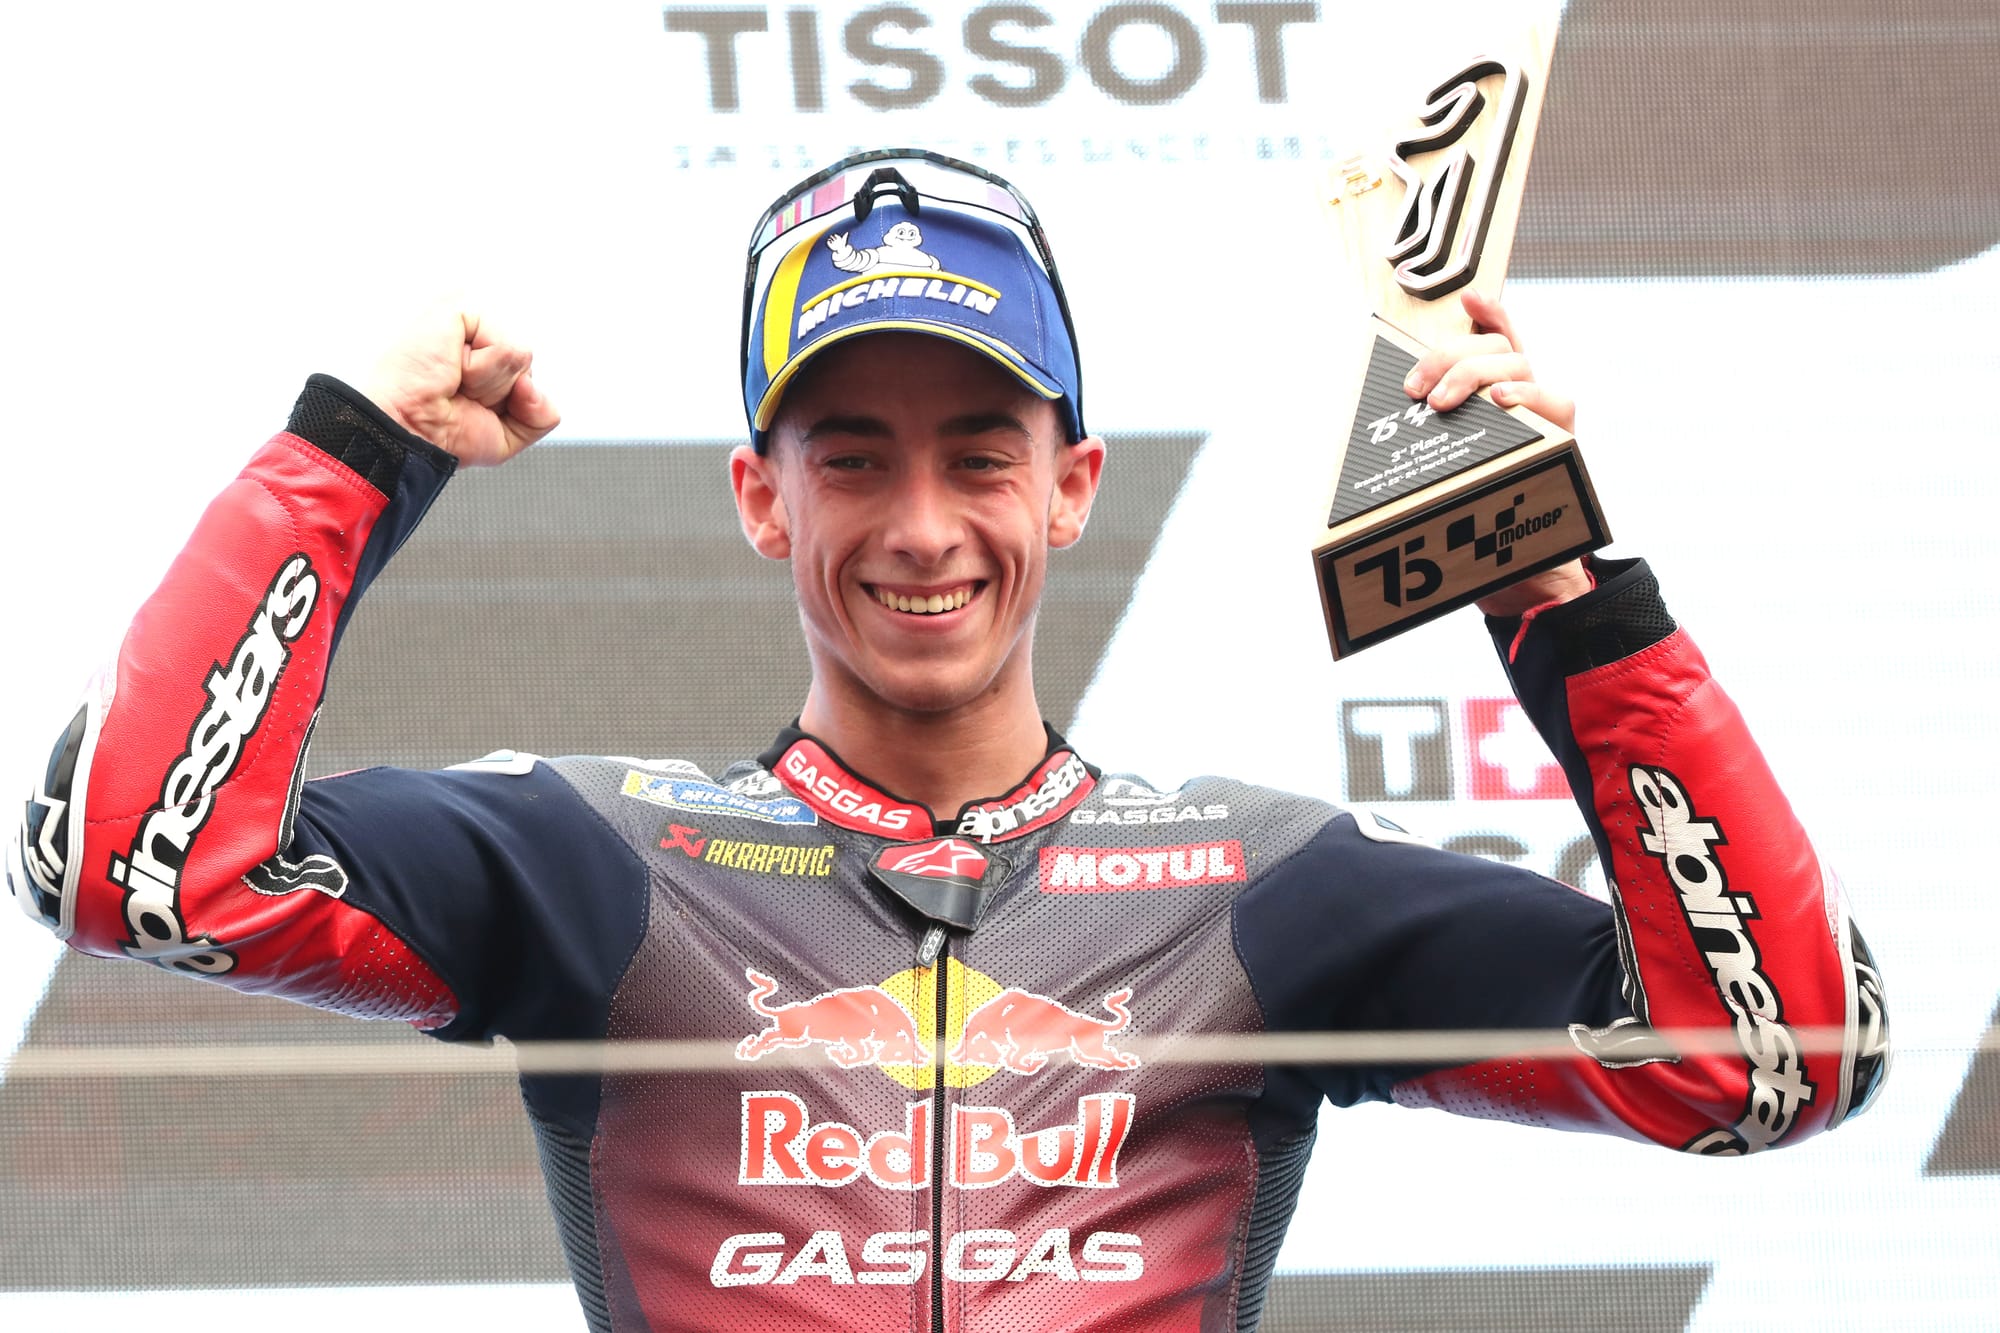 Pedro Acosta holds up his trophy for scoring a podium in the Portimao MotoGP race